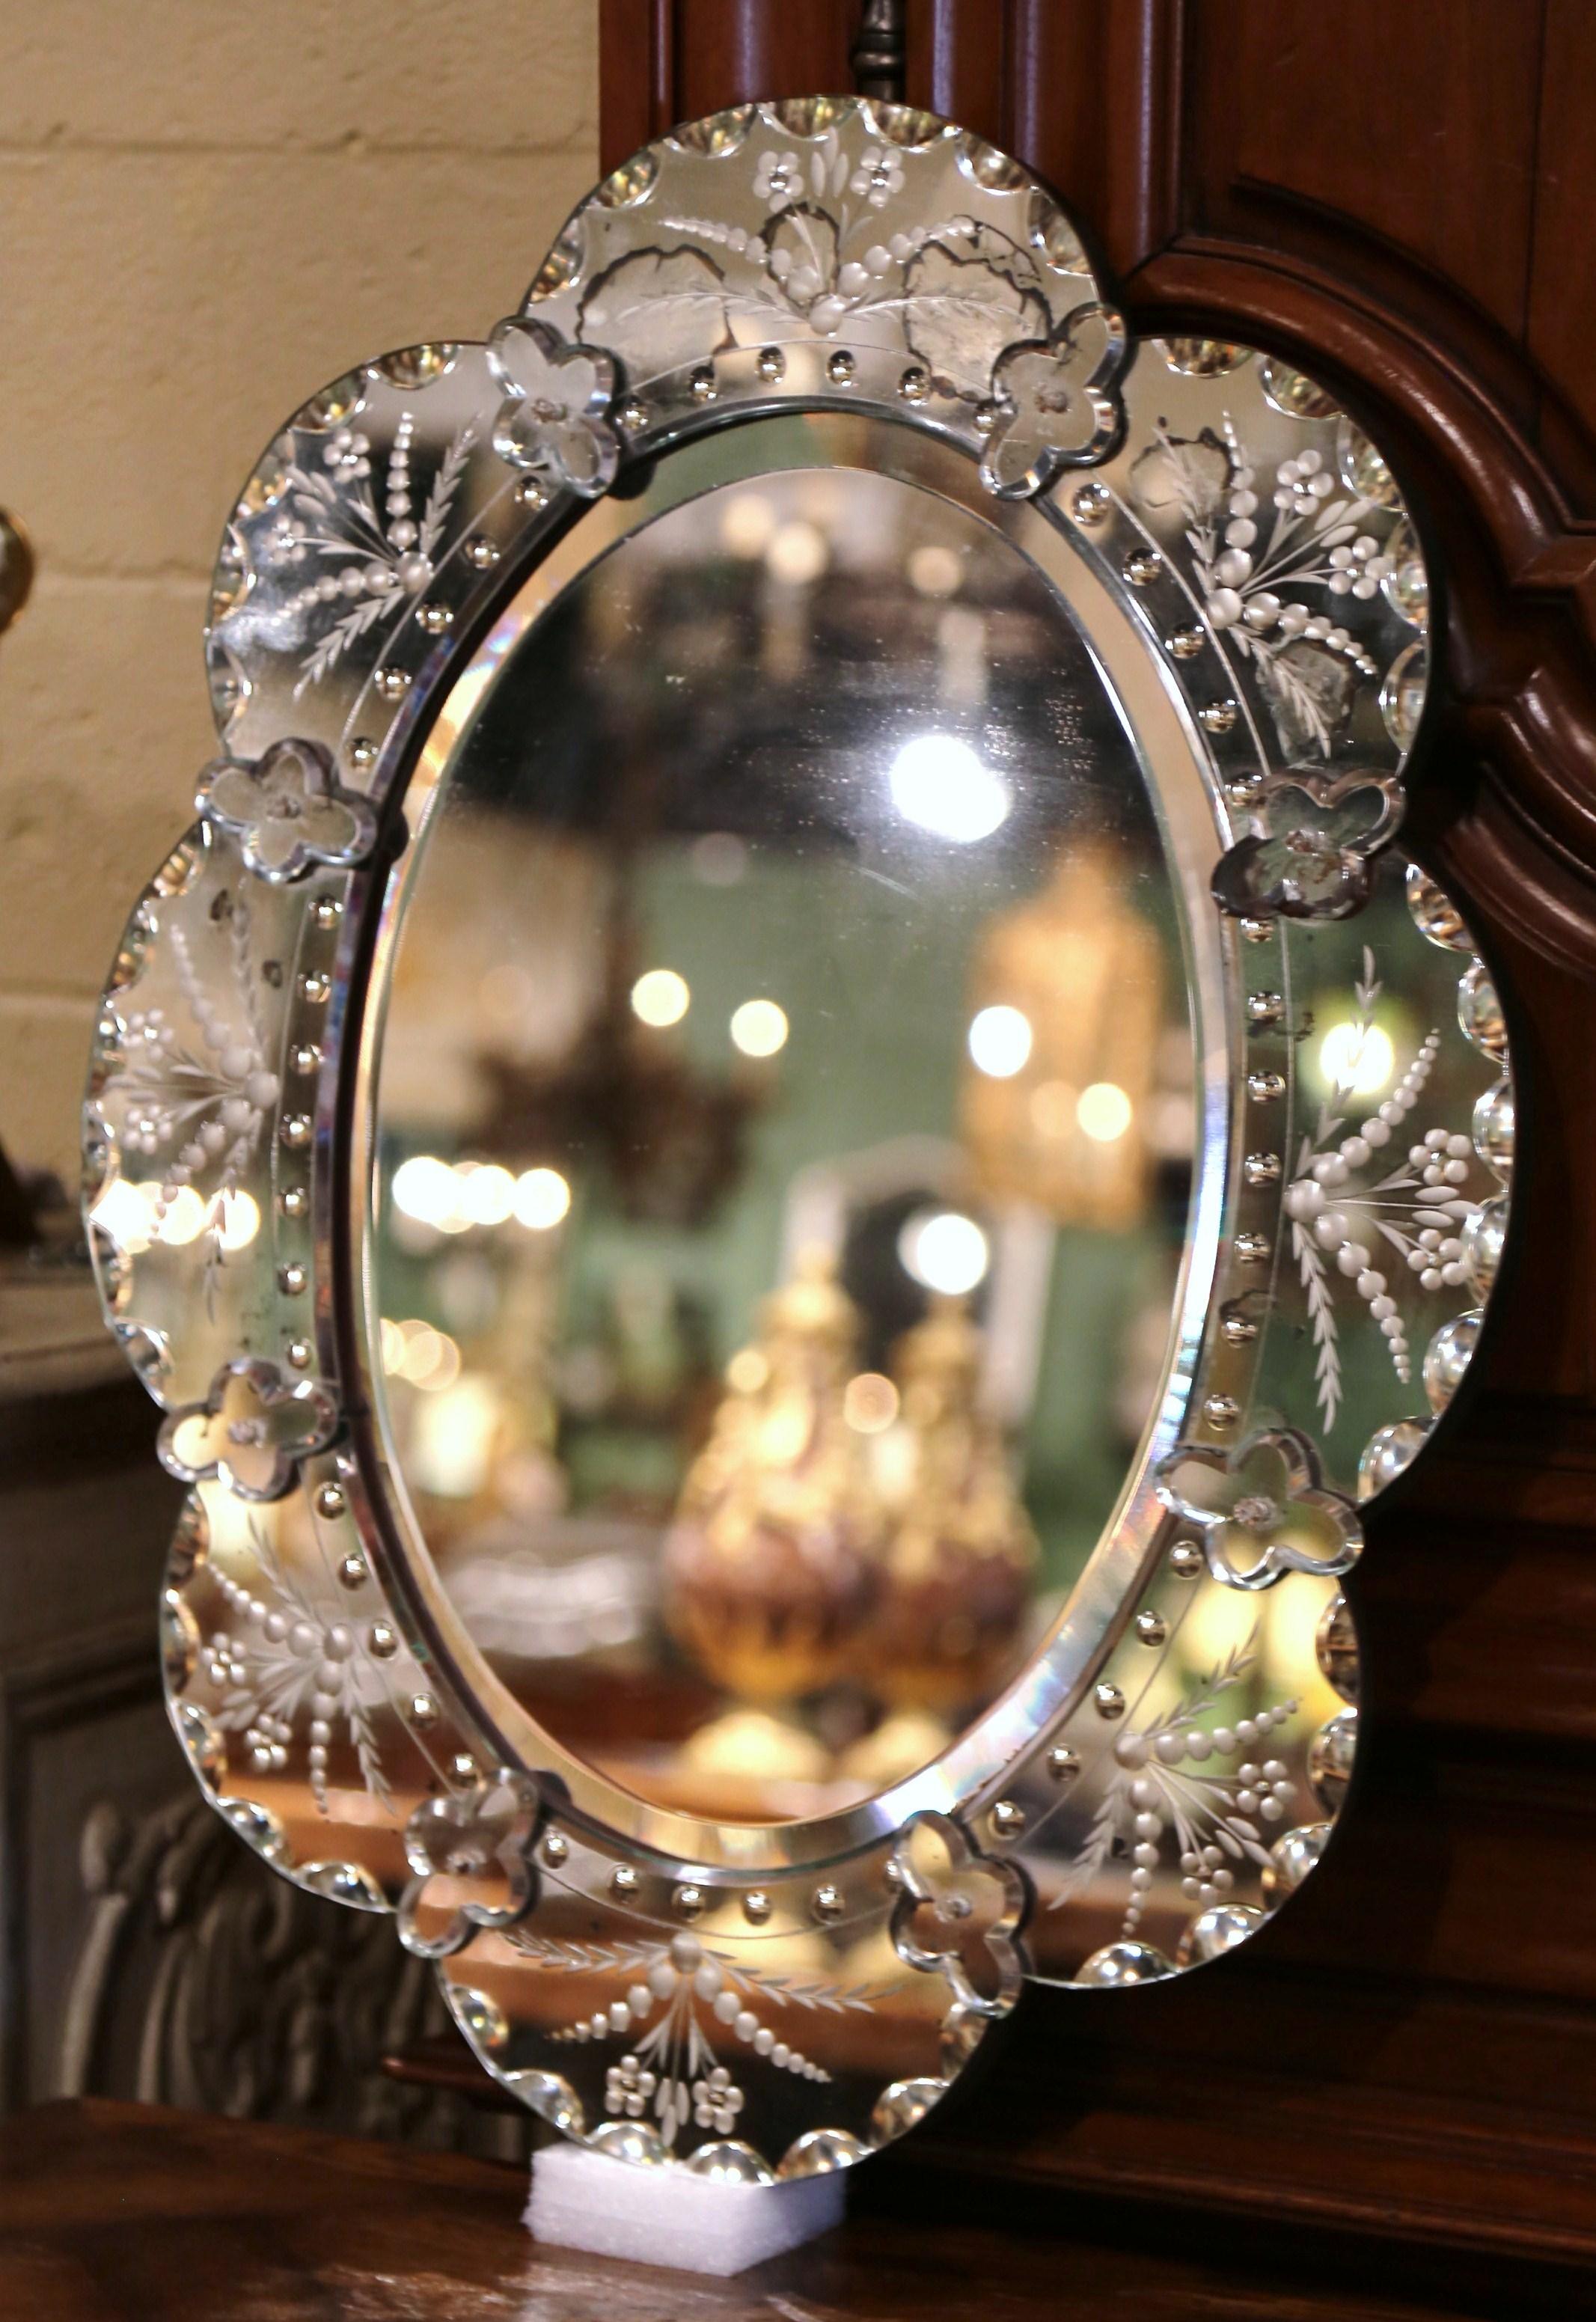 Mercury Glass Mid-20th Century Italian Venetian Wall Mirror with Painted Floral Etching